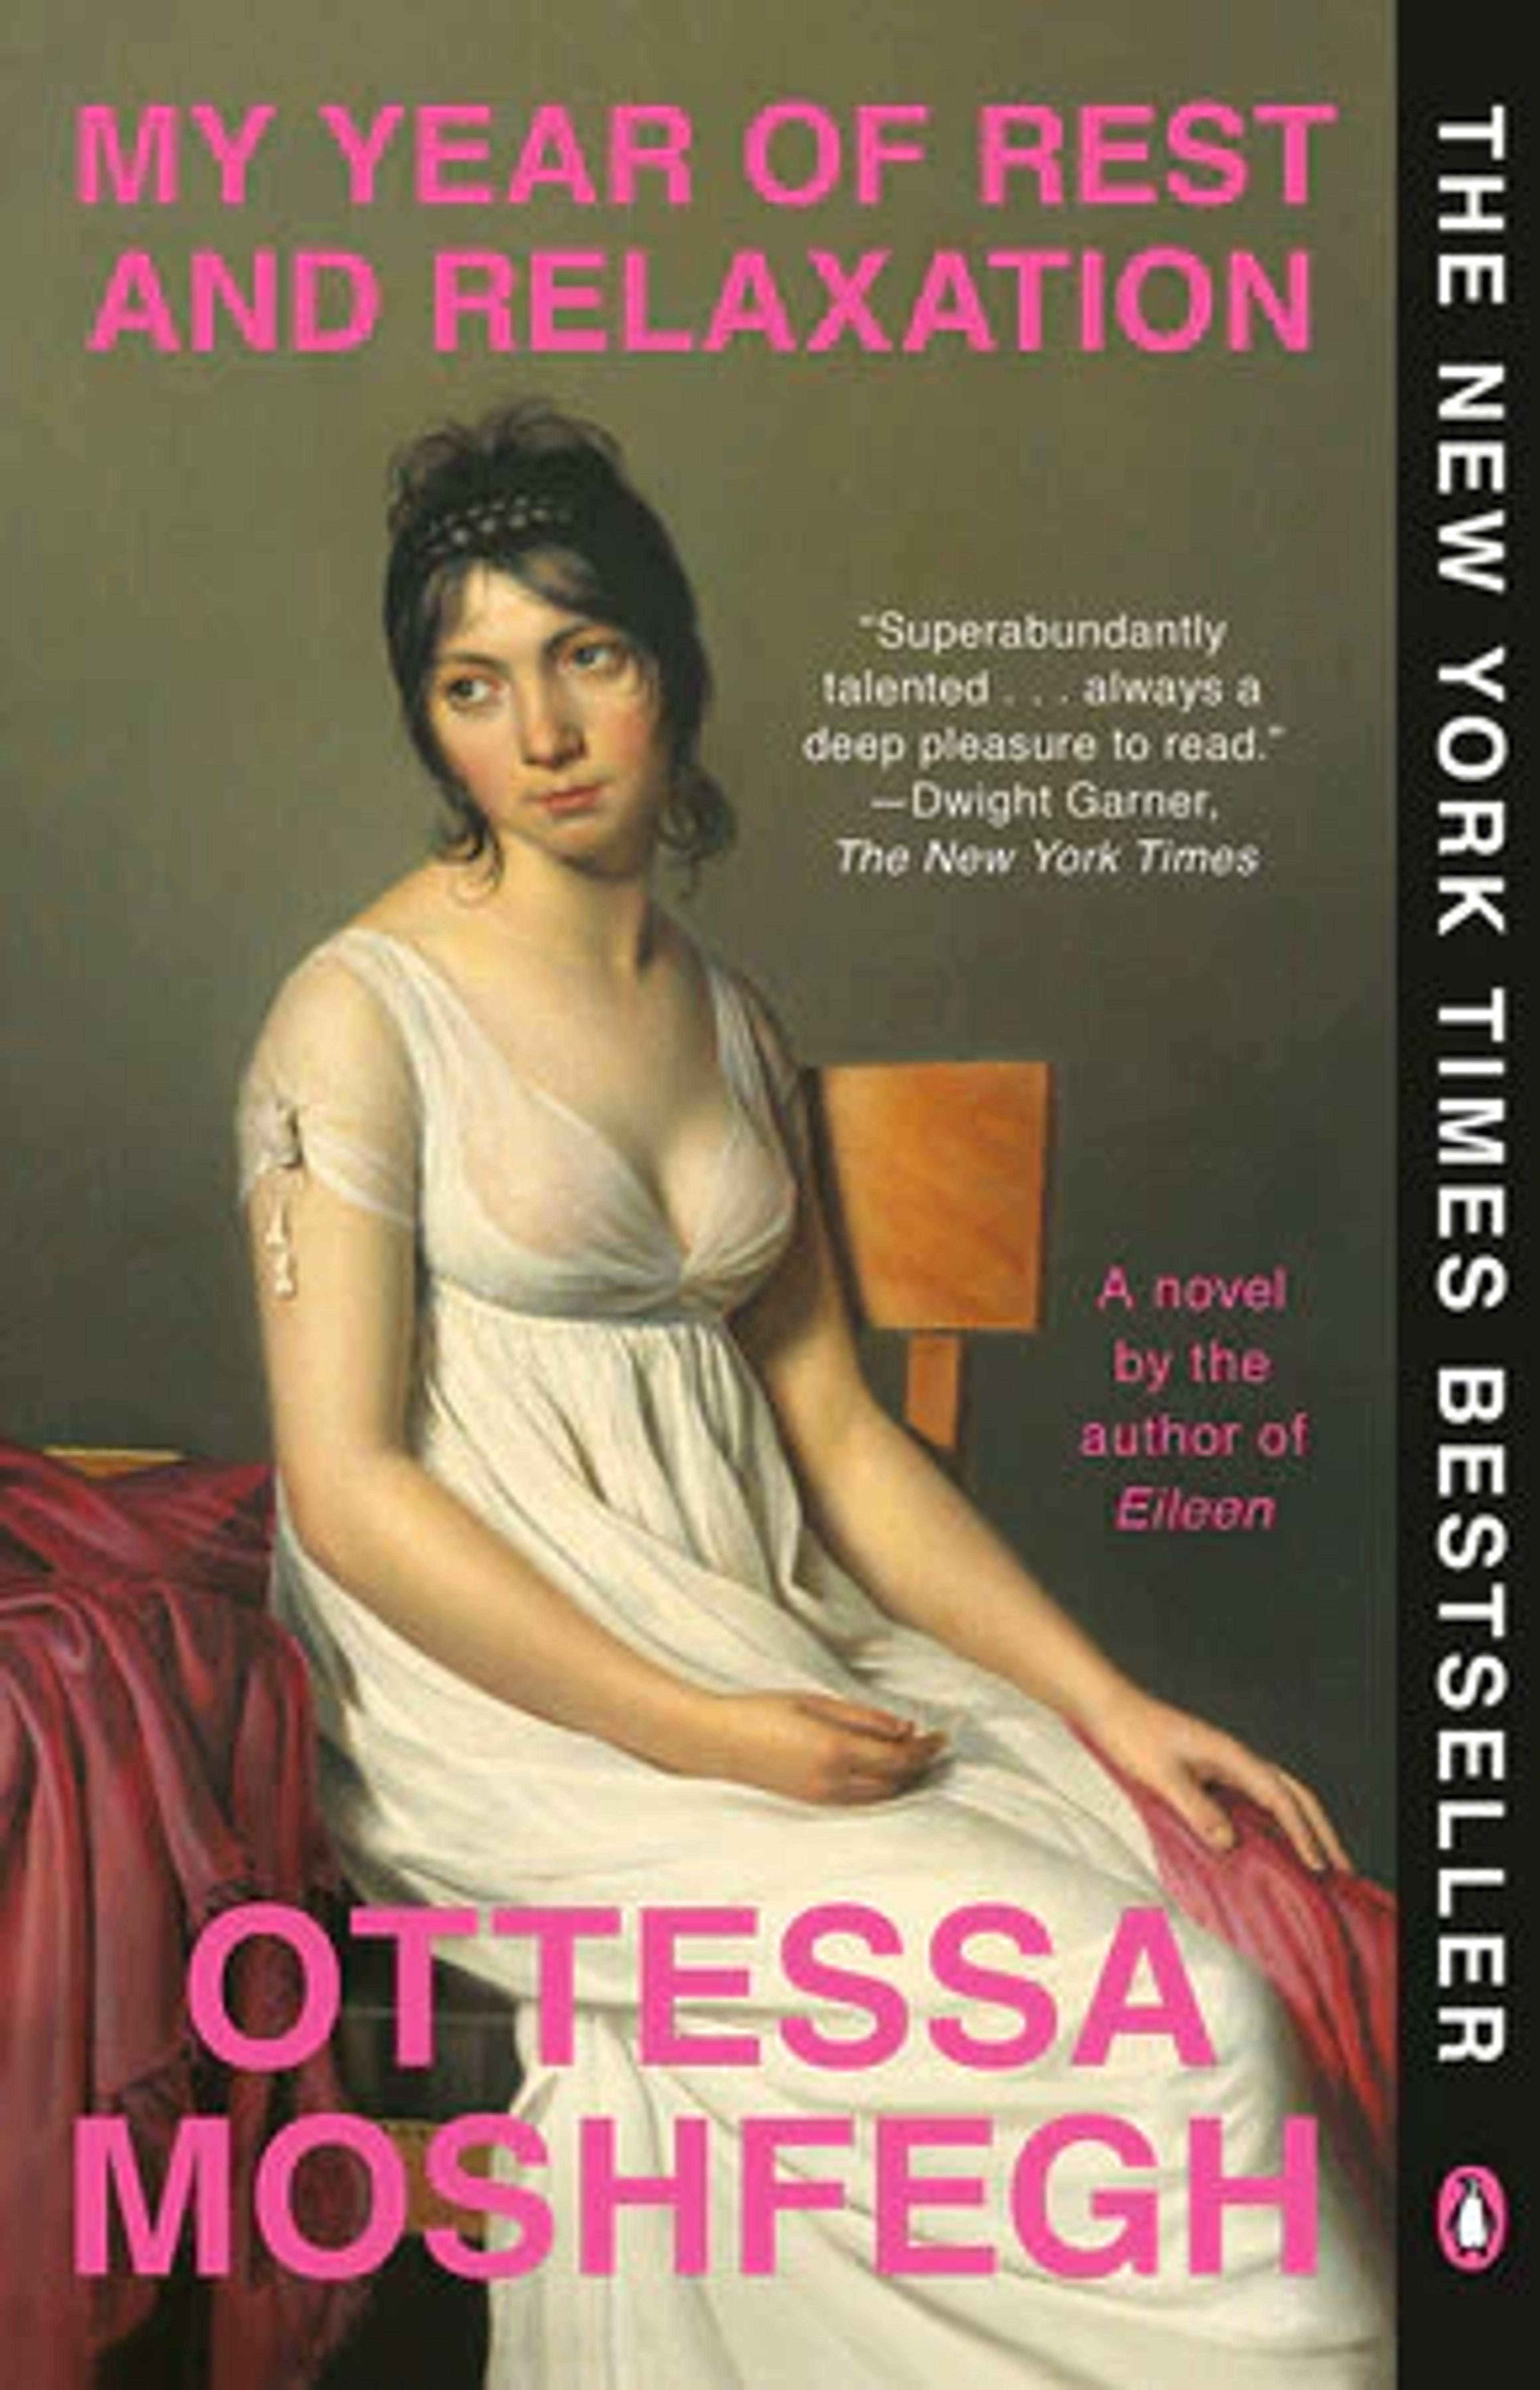 My Year of Rest and Relaxation by Ottessa Moshfegh | Folio Books